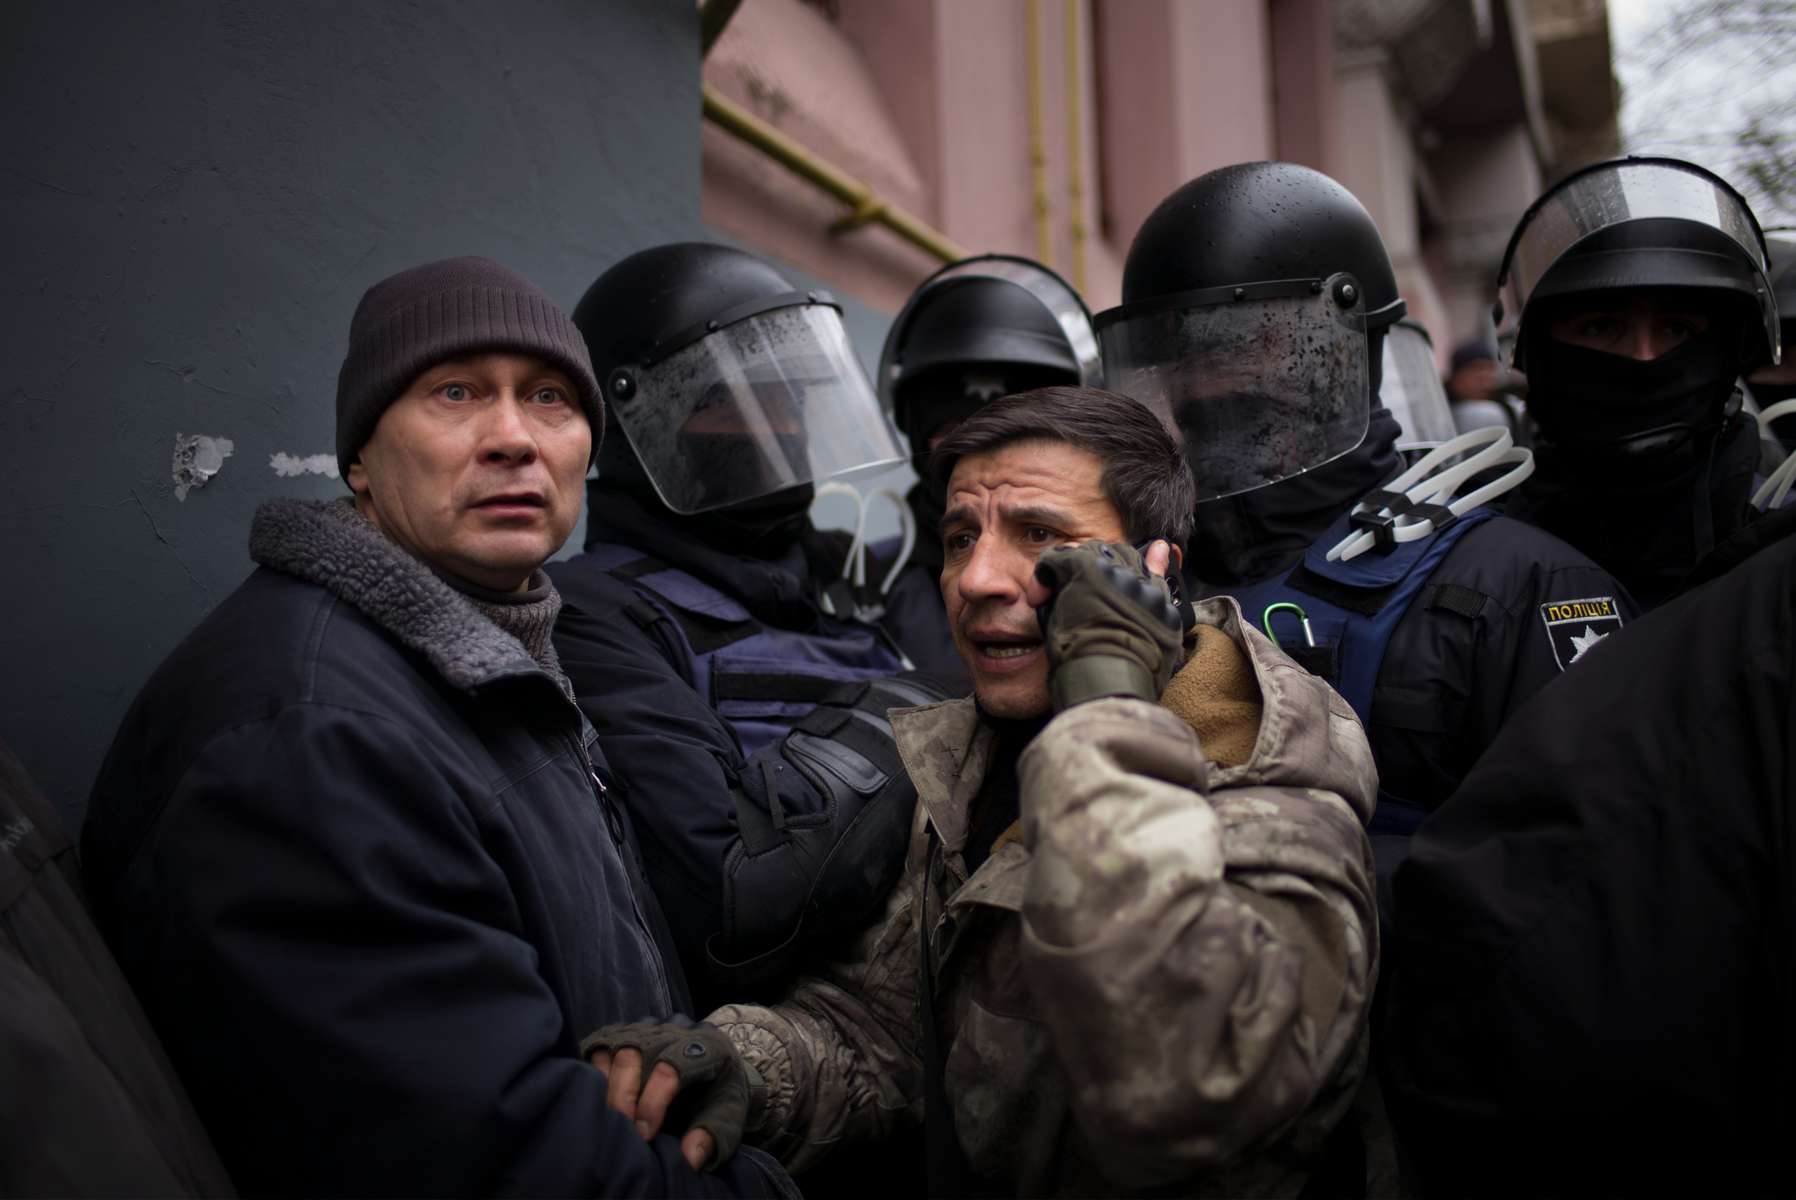 Supporters of former Georgian president clash with police as they attempts to block the police van in which he is transported after being arrested, in downtown Kiev on December 5, 2017. Ukrainian security services on Tuesday arrested former Georgian president Mikheil Saakashvili after he climbed onto the roof of his apartment building and addressed supporters during a police raid. The Ukrainian Security Service (SBU) said Saakashvili had been arrested on charges of assisting criminal organizations.Saakashvili left Georgia in 2013 after serving as president for nearly a decade, and later was appointed governor of Ukraine’s Odessa region. But he quit in 2016, complaining that his efforts to root out corruption were suffering from official obstruction.His Ukrainian citizenship was revoked this year while he was out of the country, but he returned in September after supporters broke through a police line at the Polish border.